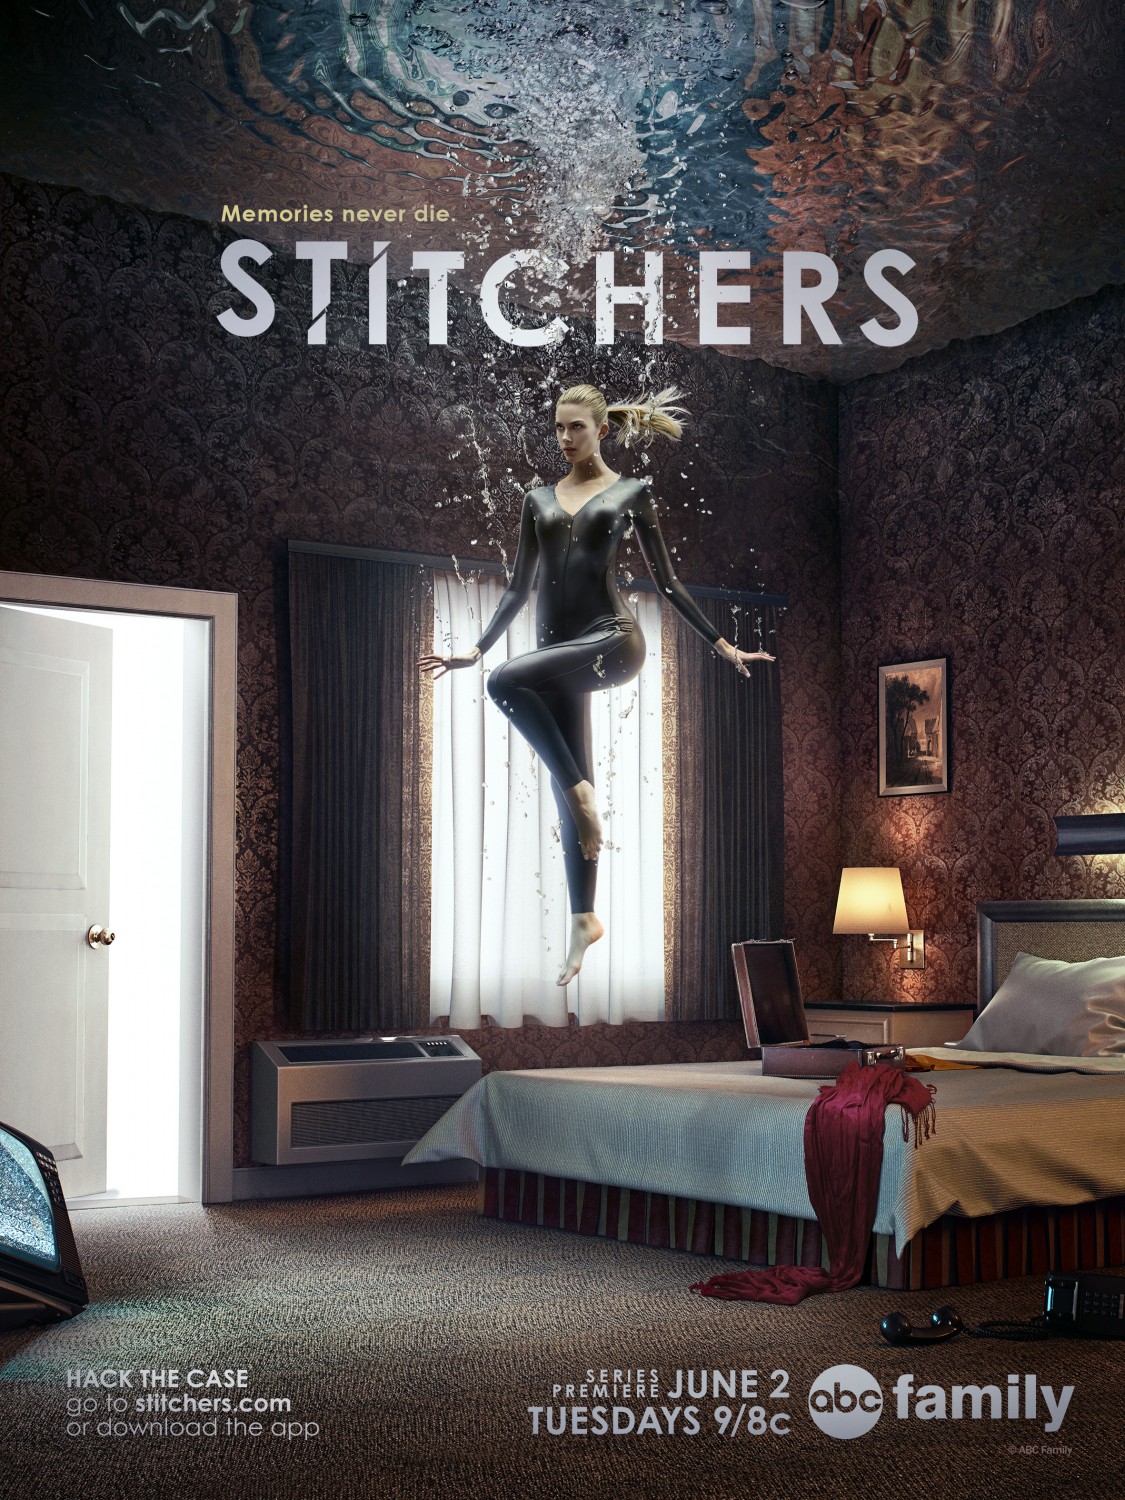 Extra Large TV Poster Image for Stitchers (#1 of 2)